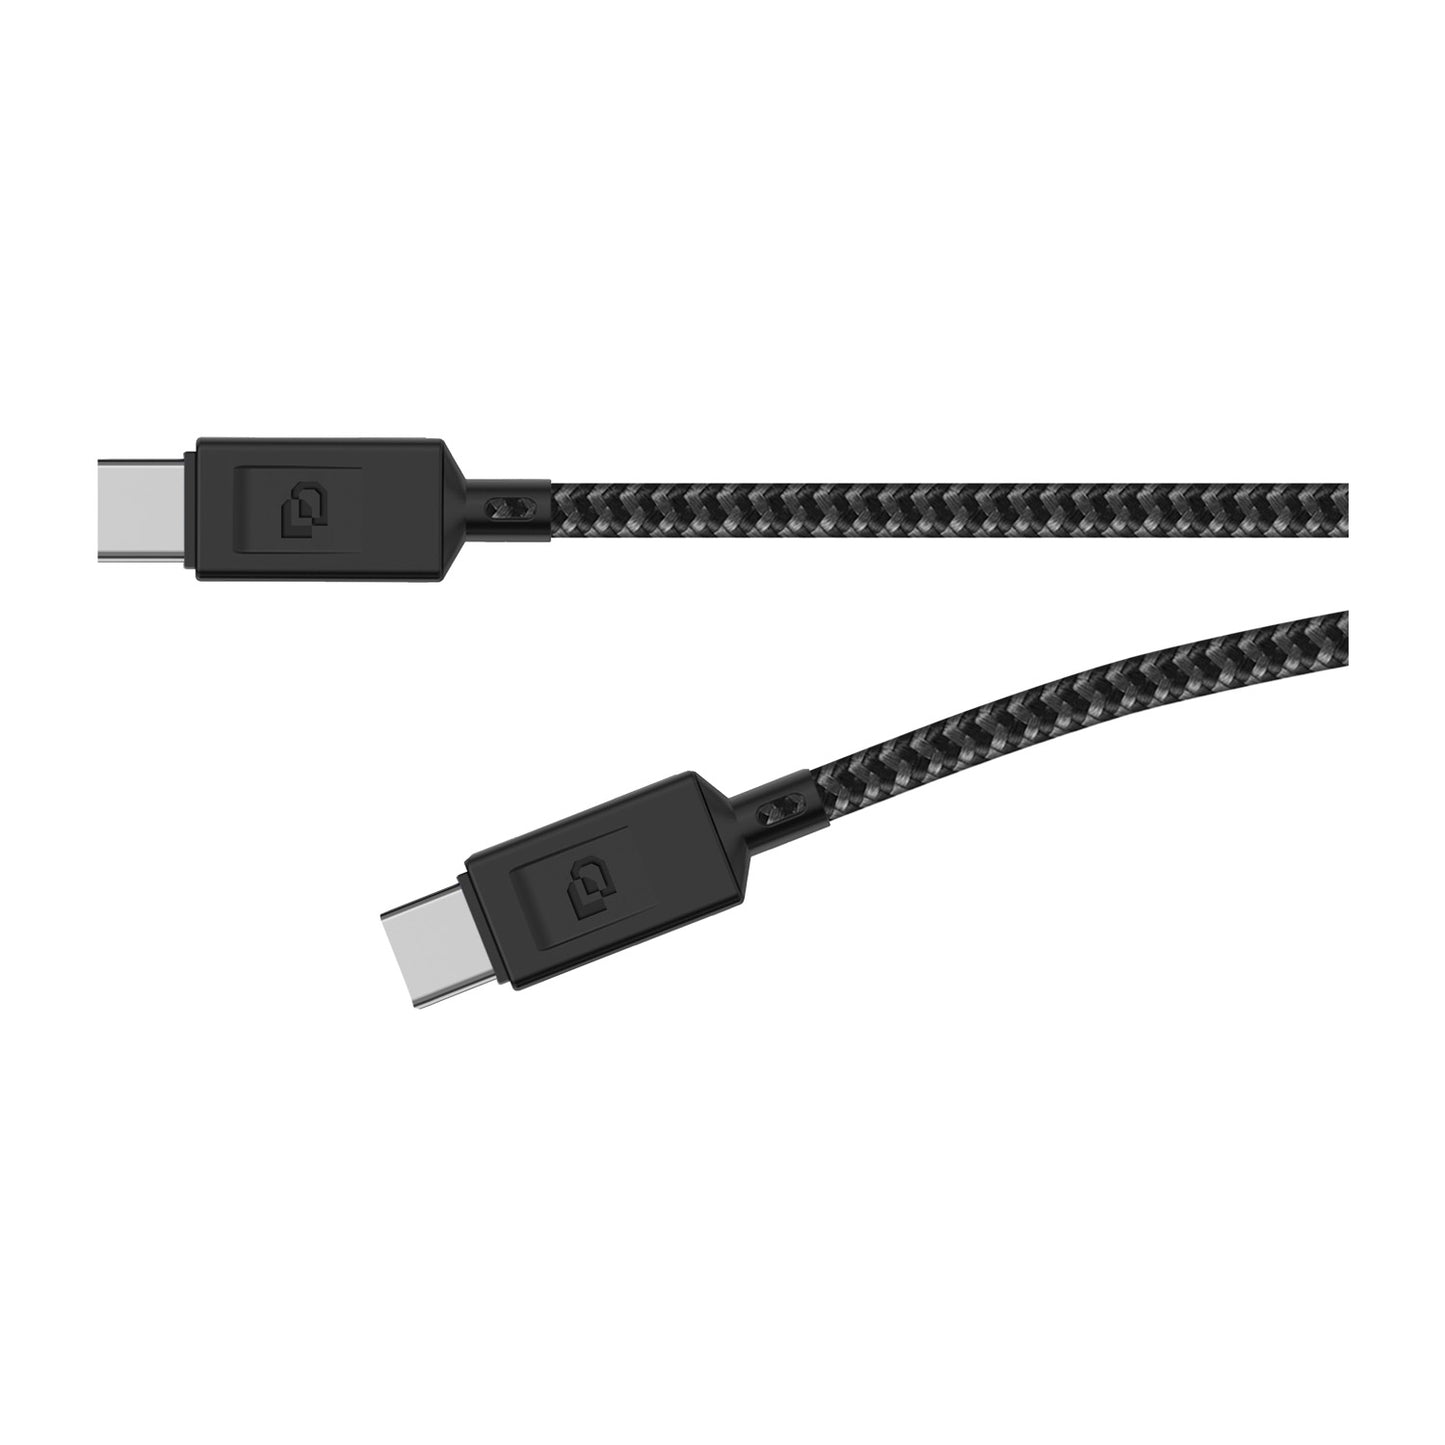 Cable USB Tipo-C a USB Tipo- C 3.2 Rugged Dusted Negro